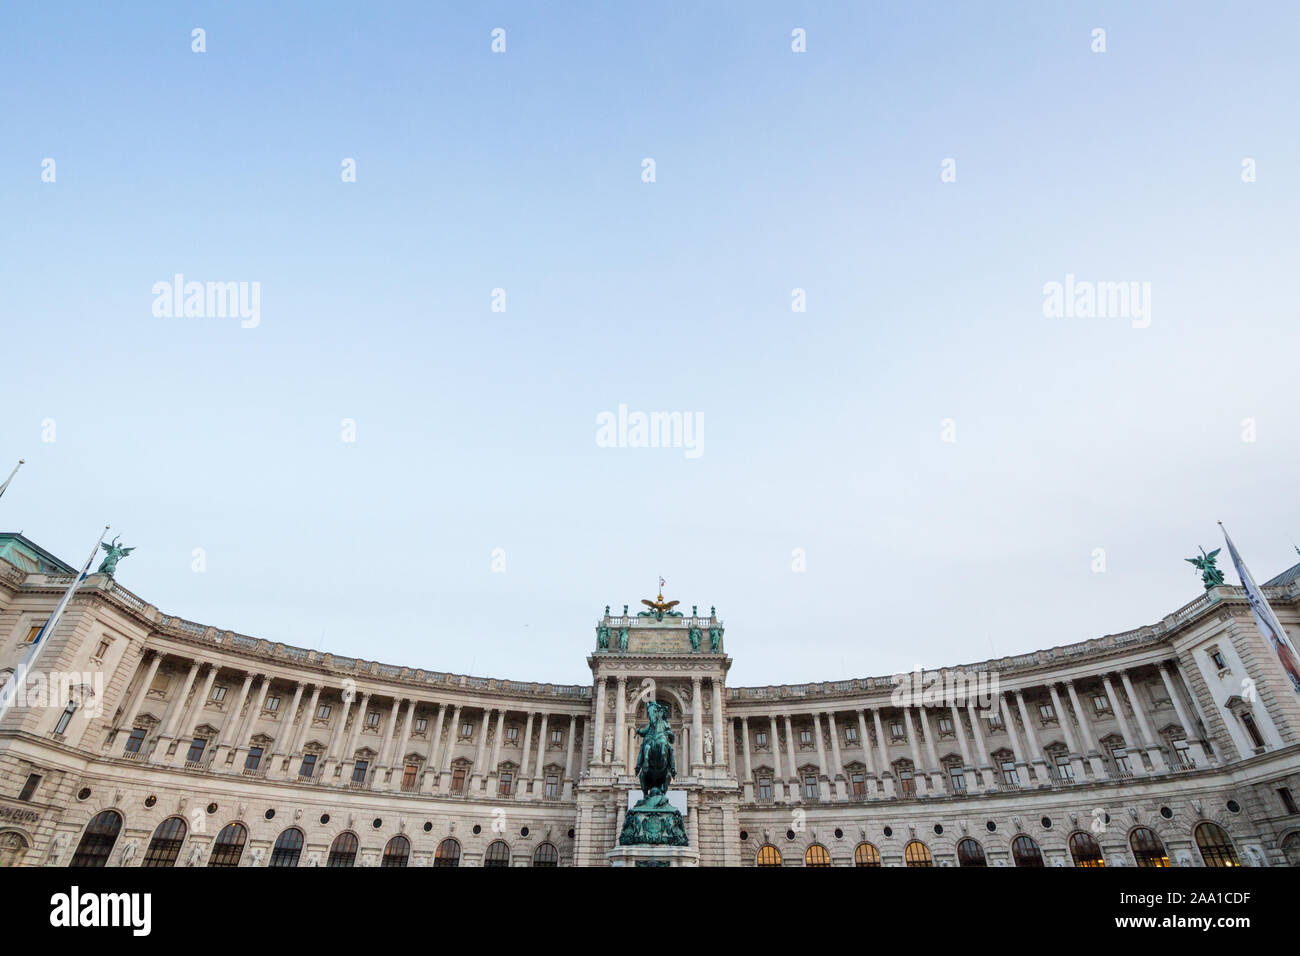 Hoffburg palace, on its Neue Burg aisle, taken from the Heldenplatz square, with the 19th century Prinz Eugen statue in front in Vienna, Austria. It i Stock Photo